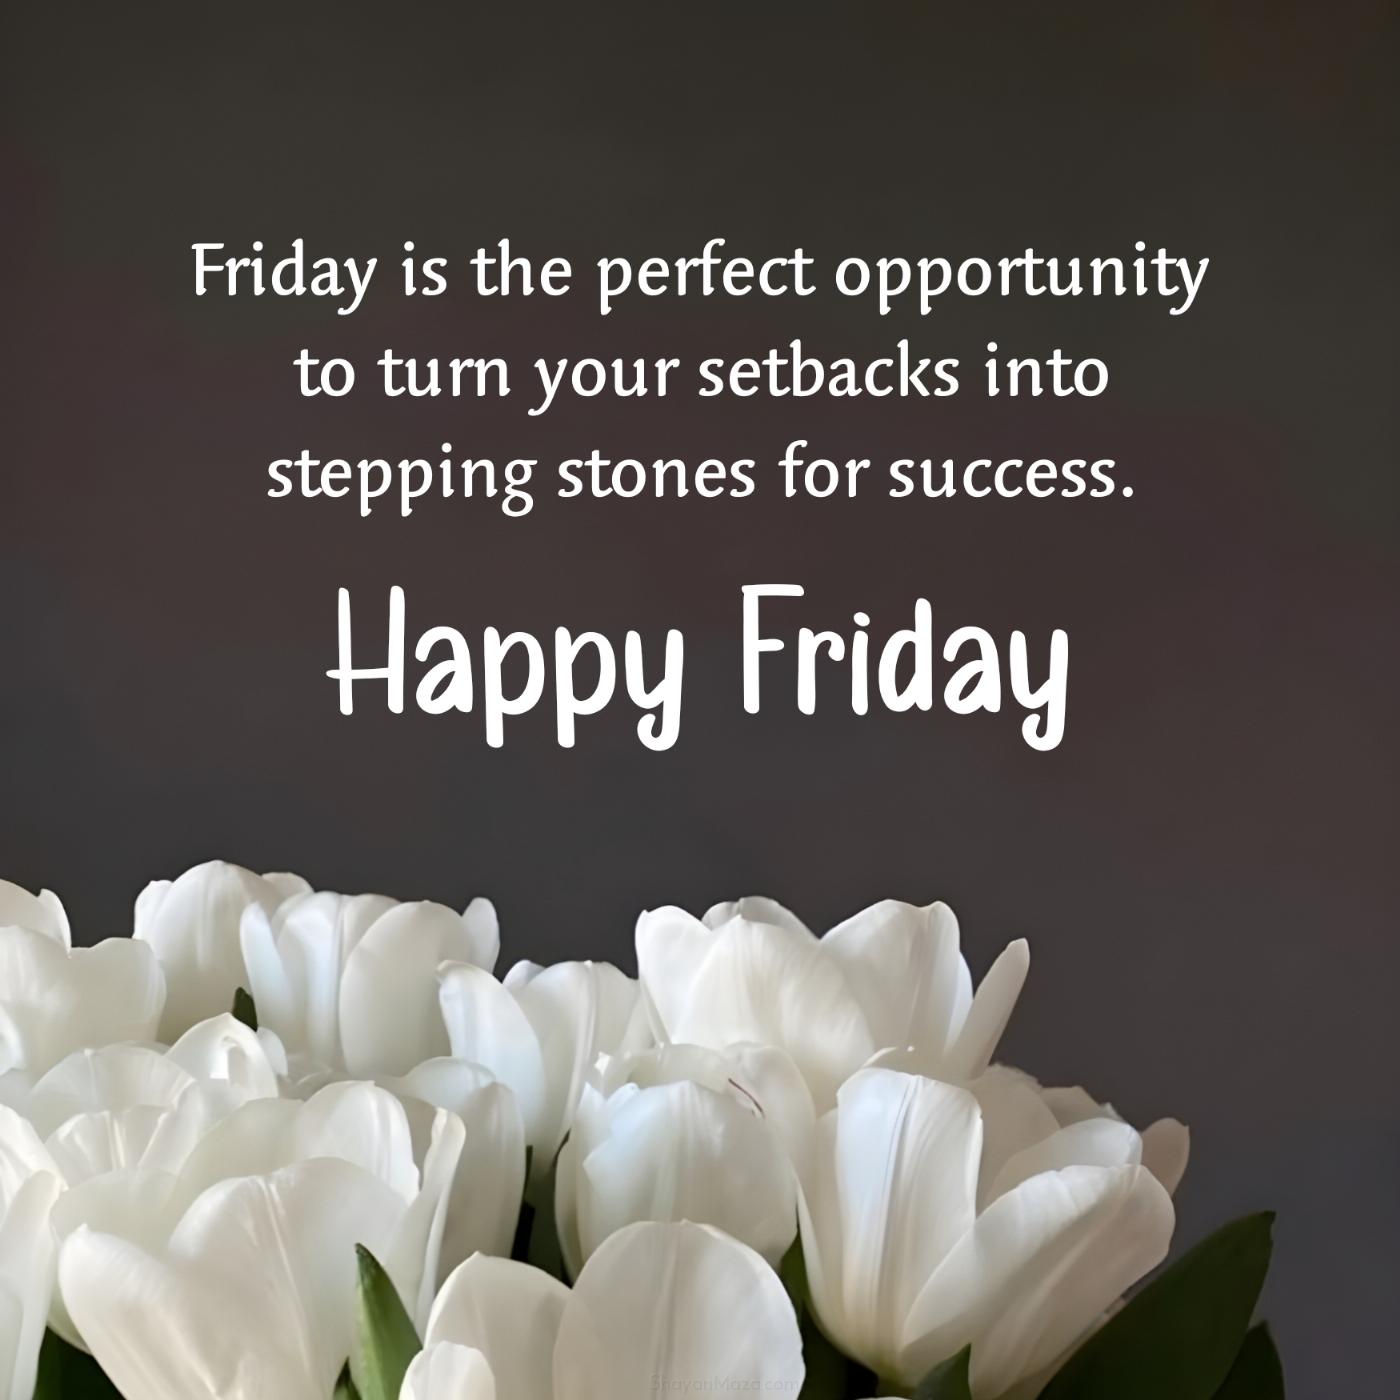 Friday is the perfect opportunity to turn your setbacks